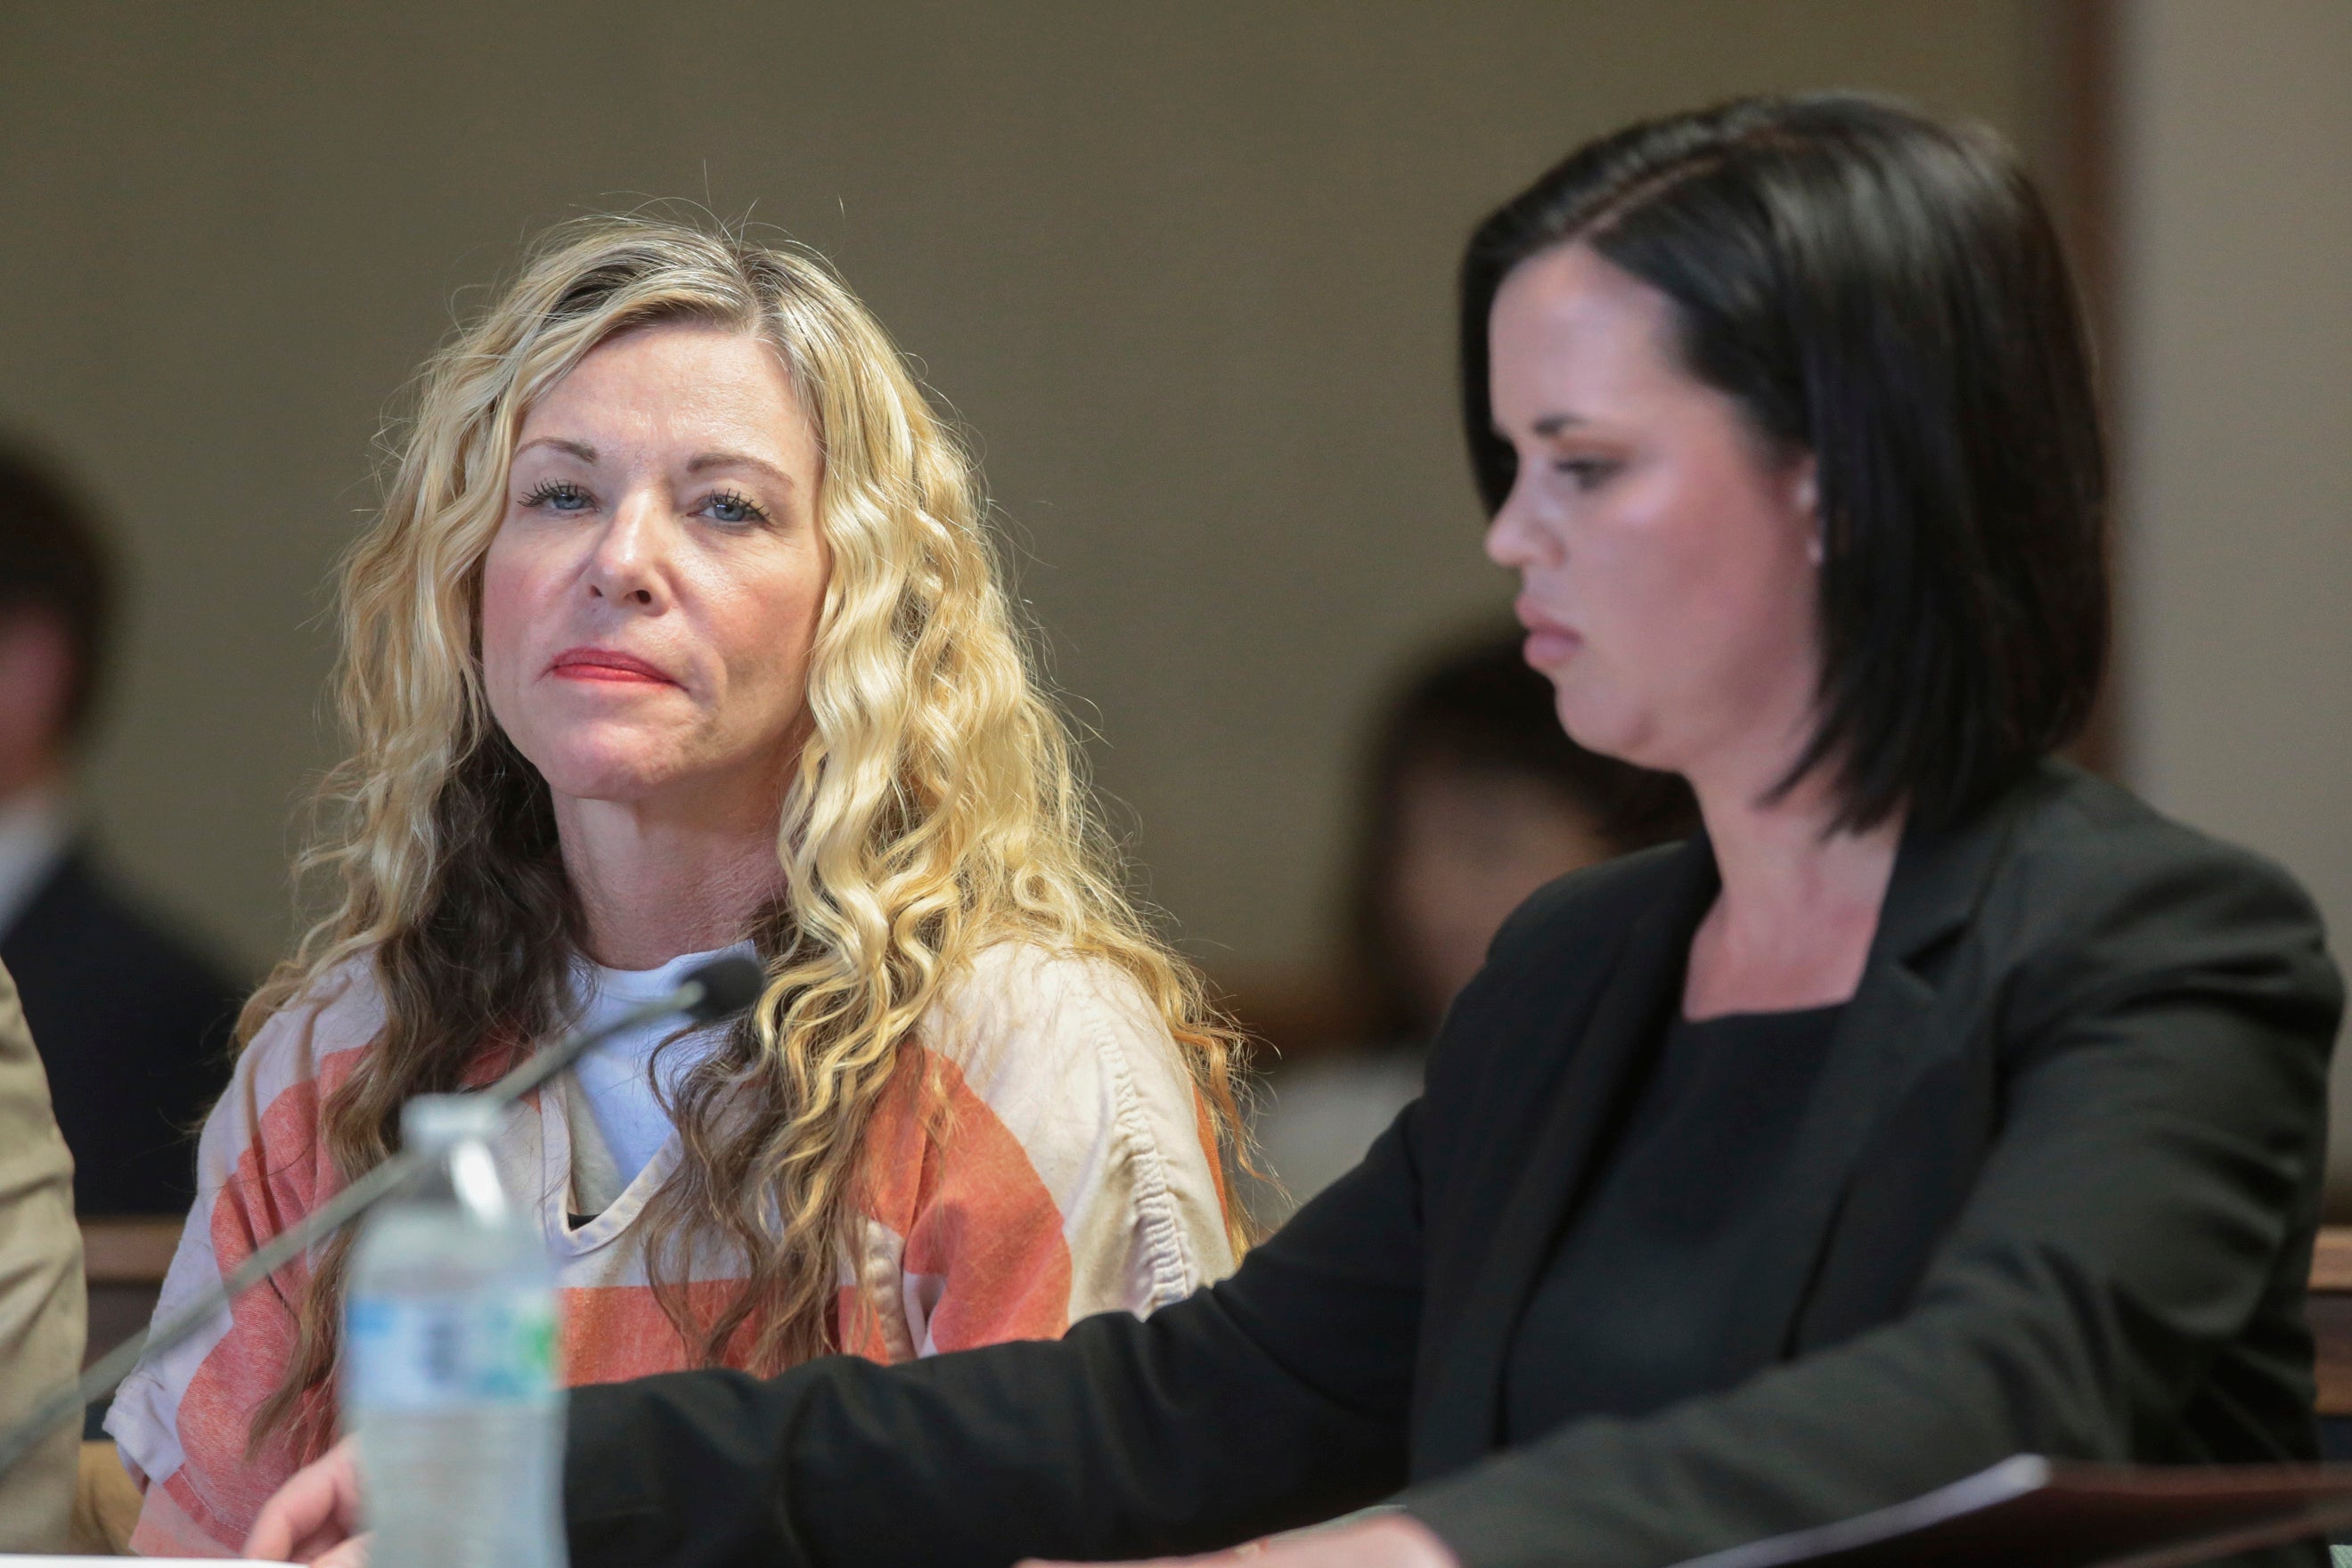 Lori Vallow, who married Chad Daybell two weeks after his wife mysteriously died, was convicted of murder and conspiracy to murder in the deaths of her children and Tammy Daybell